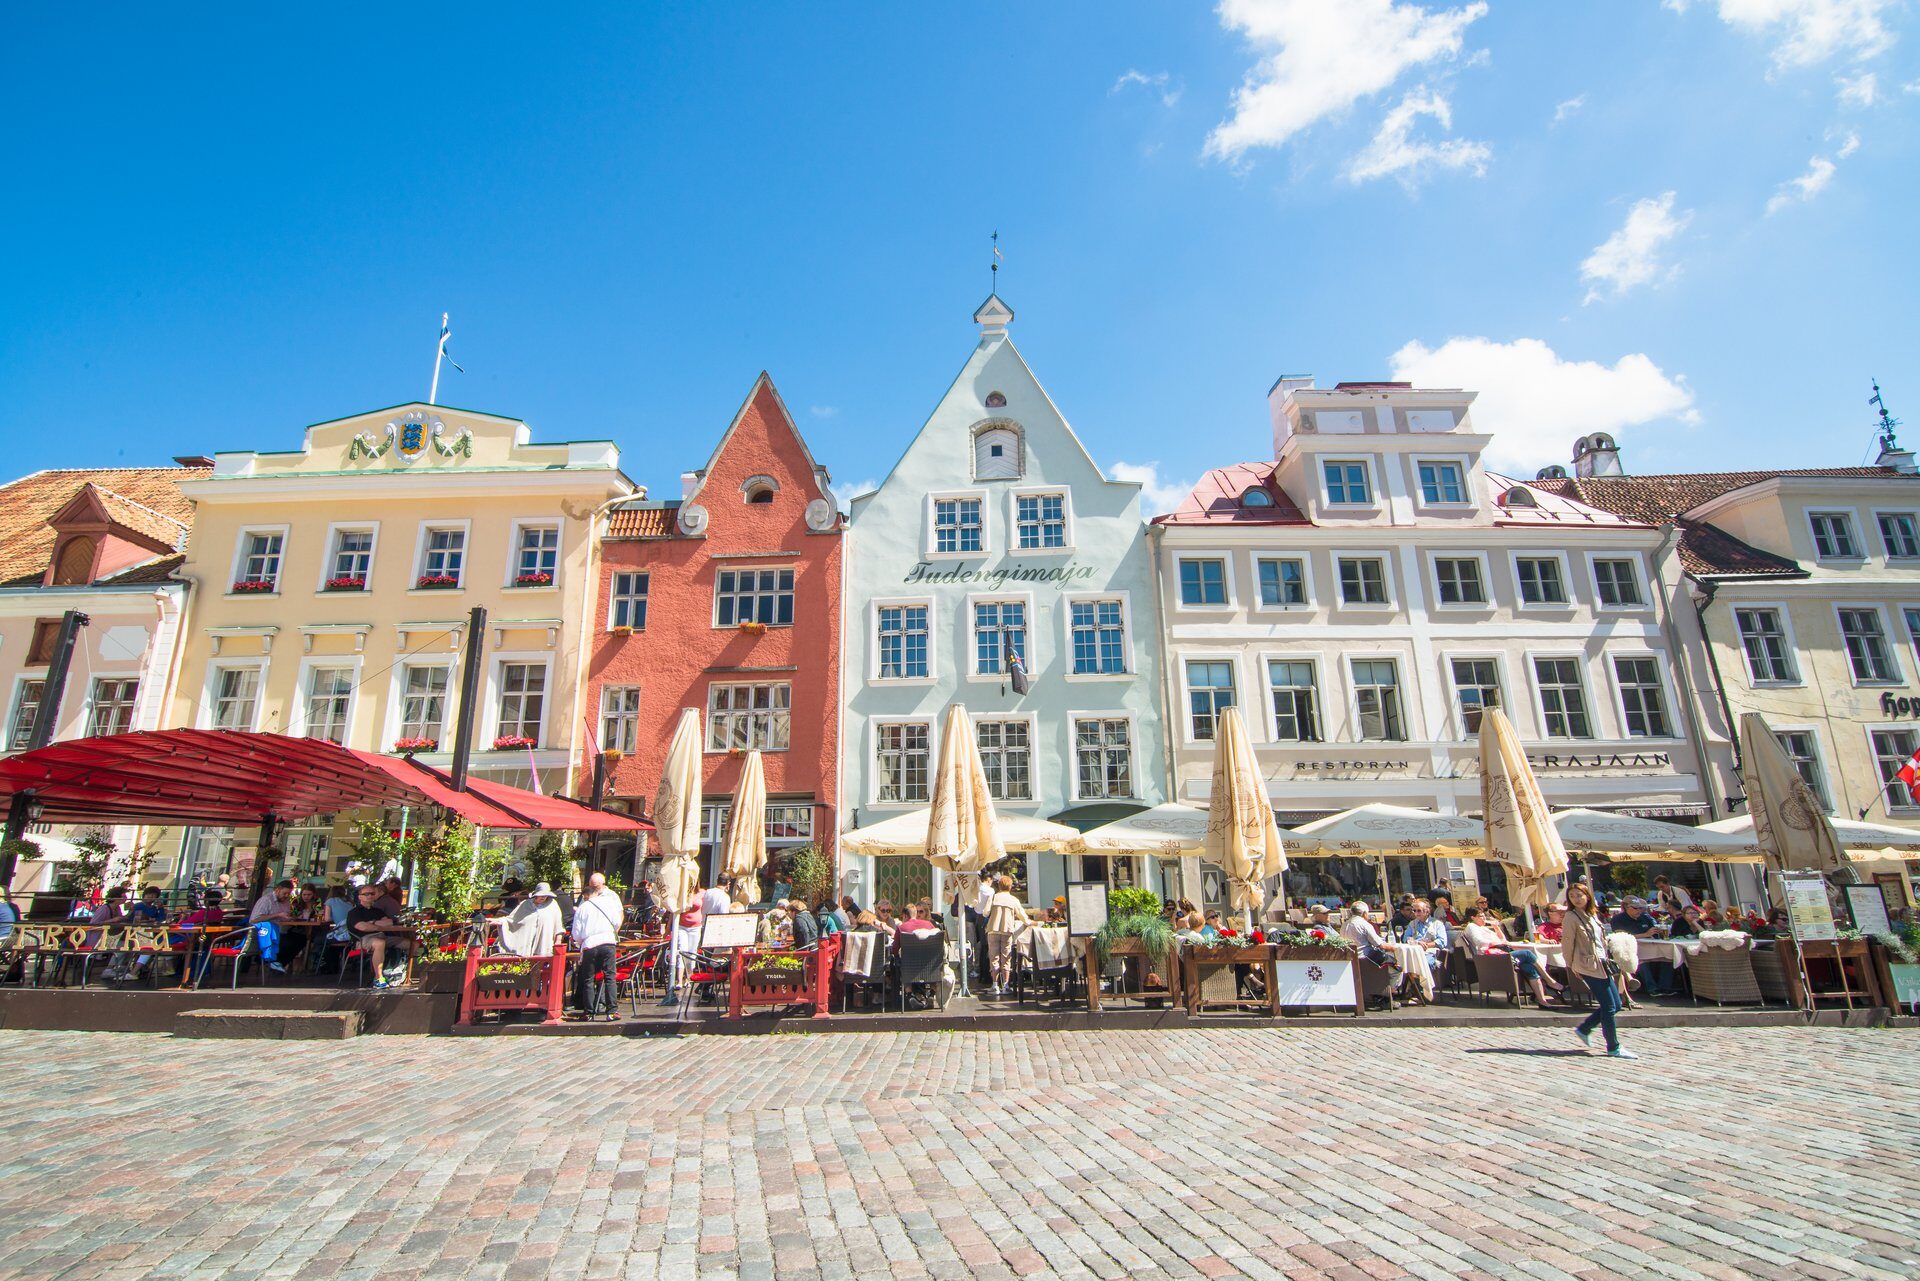 15 Unforgettable Things to Do in Tallinn | Celebrity Cruises